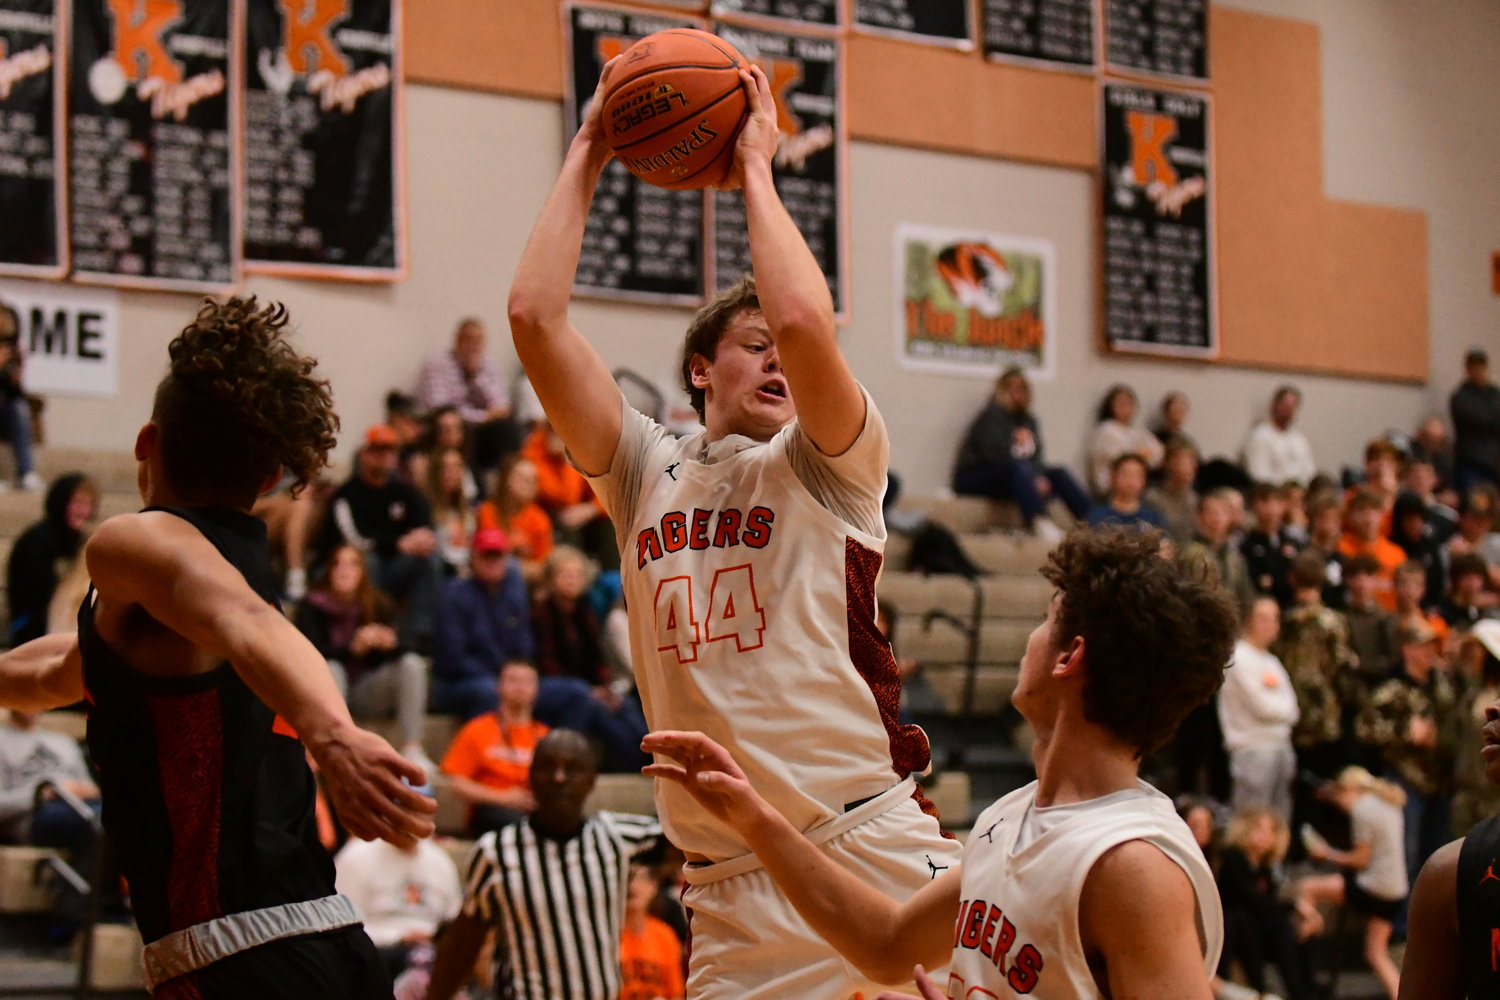 Kirksville's Camden Dempsay grabs one of many rebounds in a win over Macon on Jan. 11, 2022.